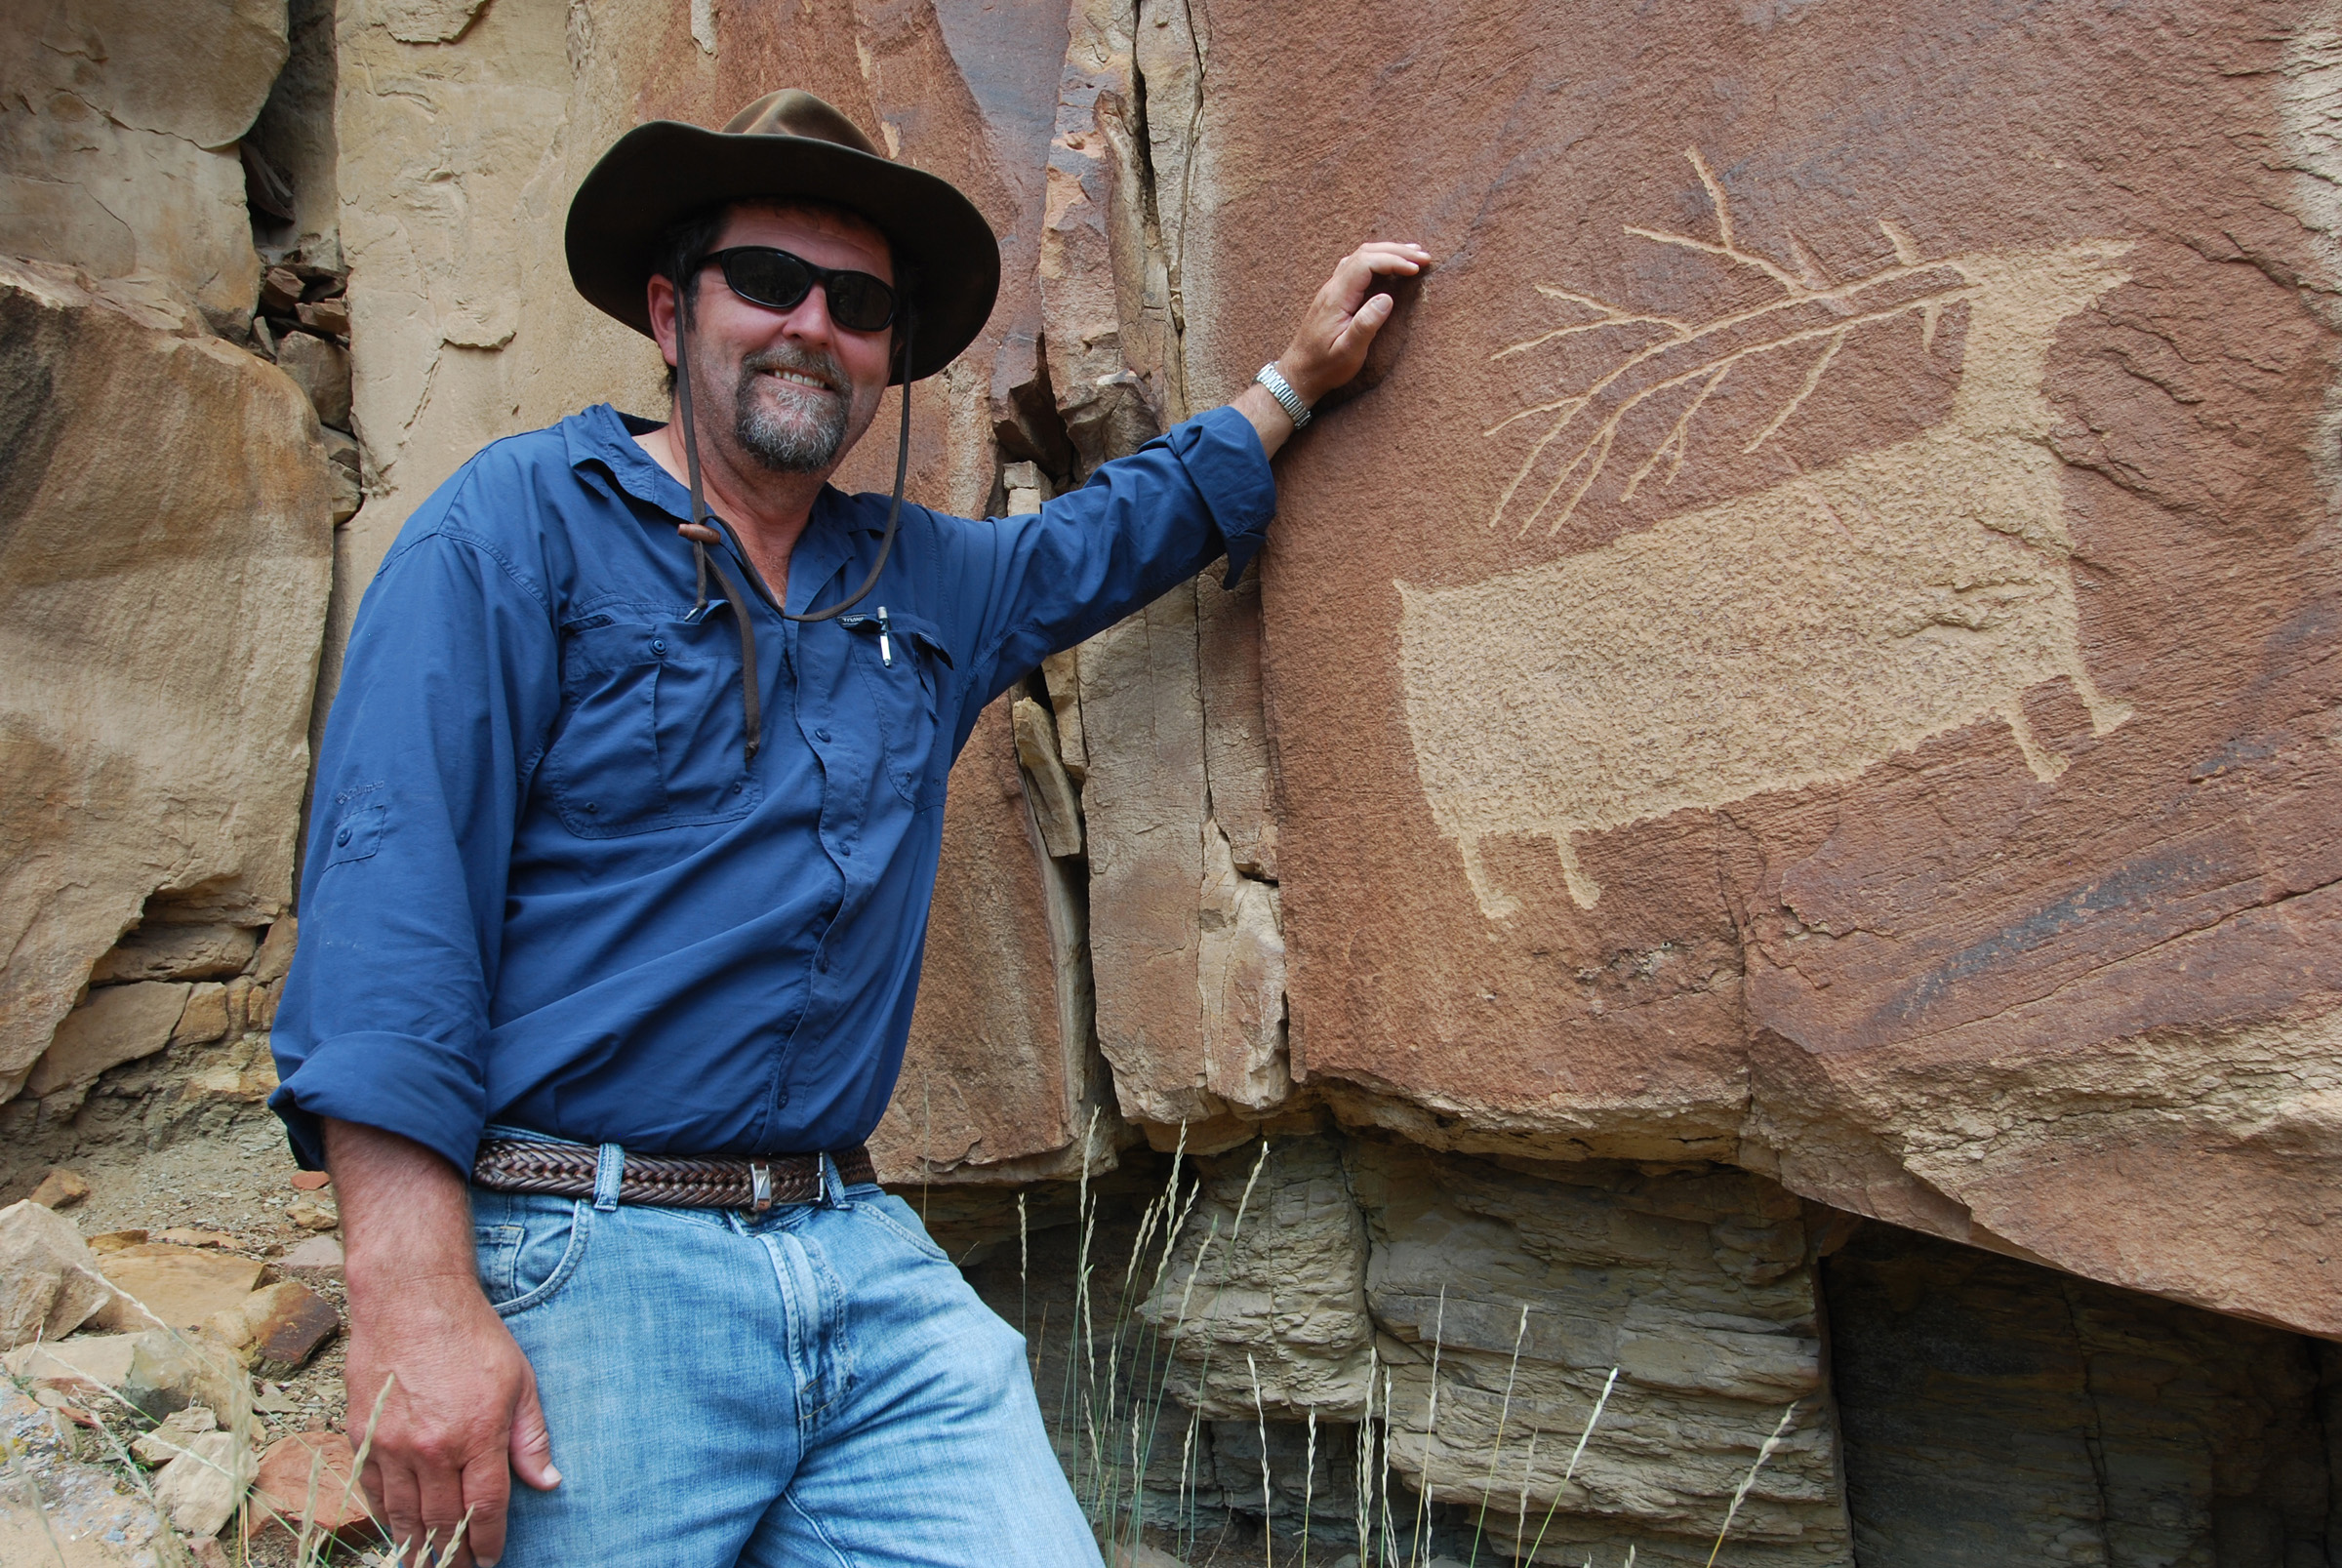 Archaeologist Jerry Spangler discusses his new book about Nine Mile Canyon Oct. 10 as part of the Wallace Stegner Center’s “Green Bag” series. Nine Mile Canyon is believed to be home to the largest concentration of rock art in North America.